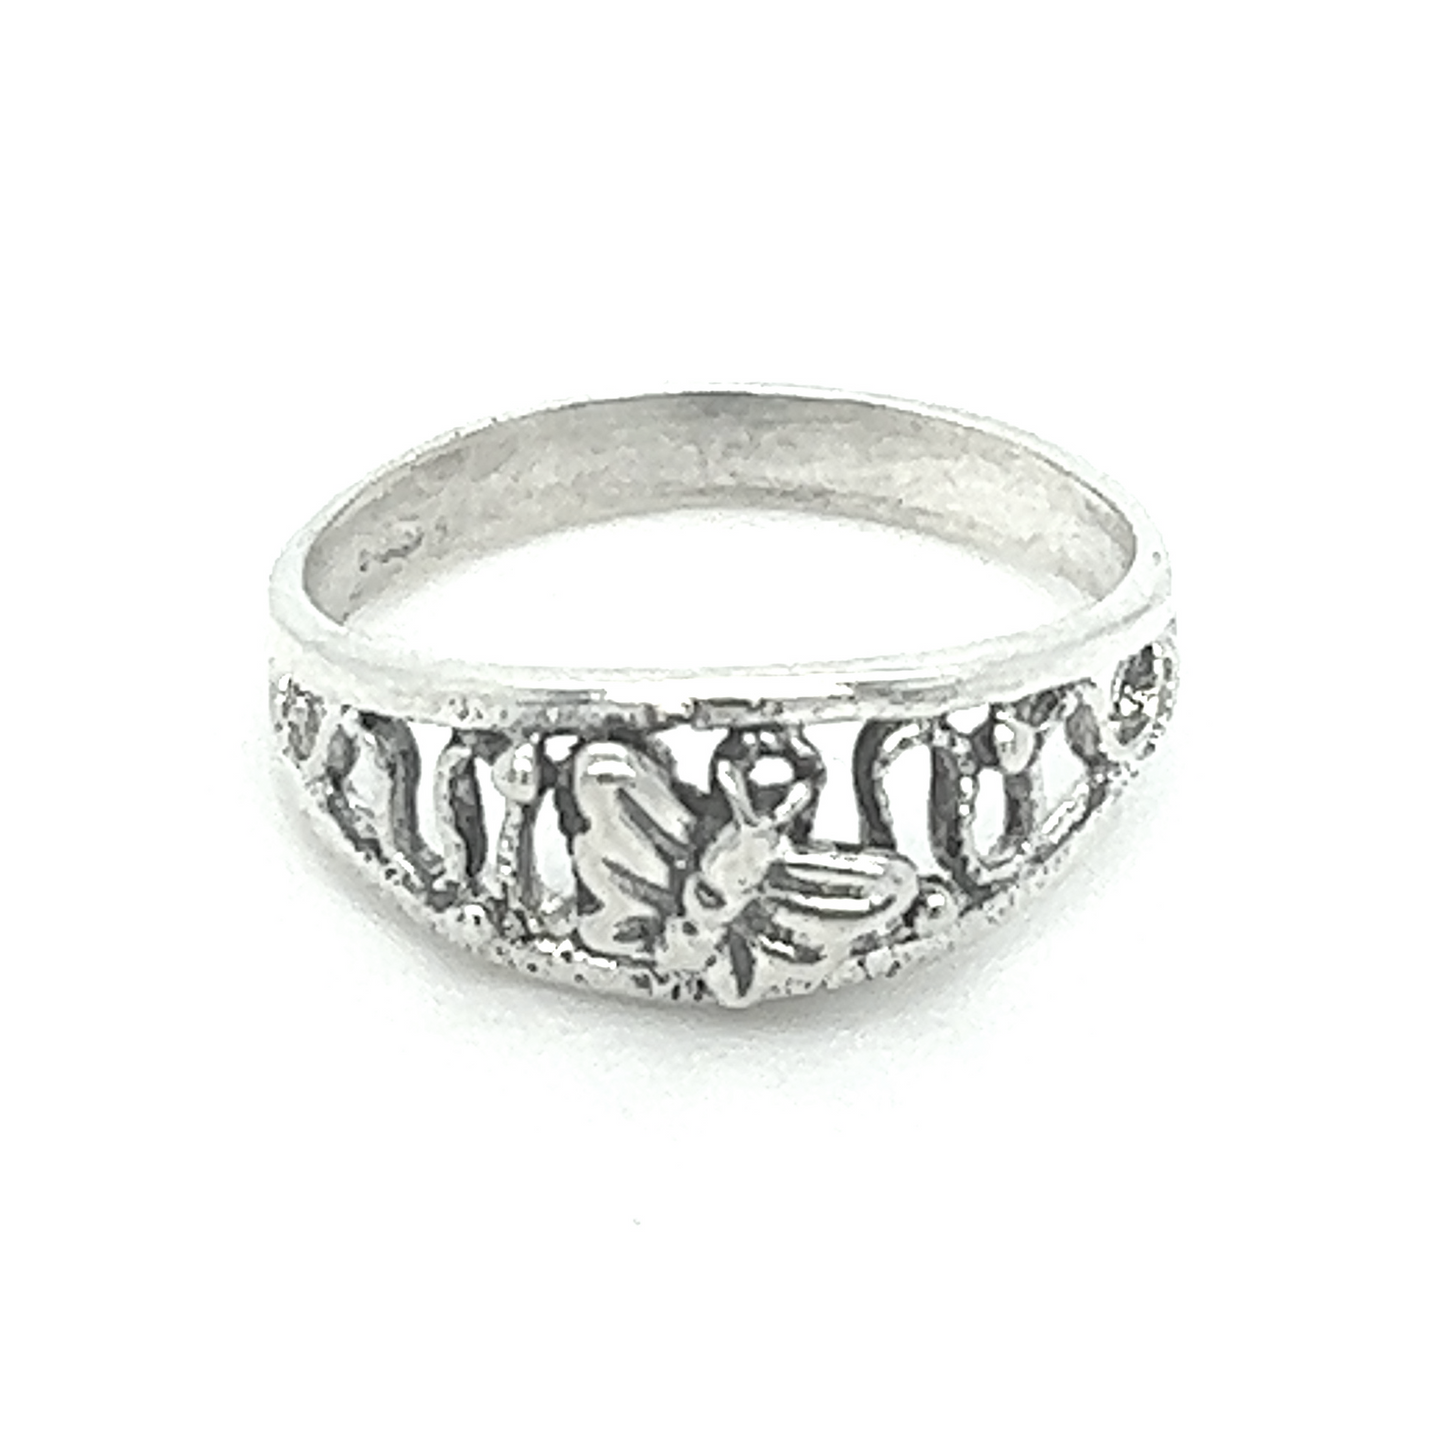 A Flying Butterfly Ring made of .925 Sterling Silver with a domed cutout band.